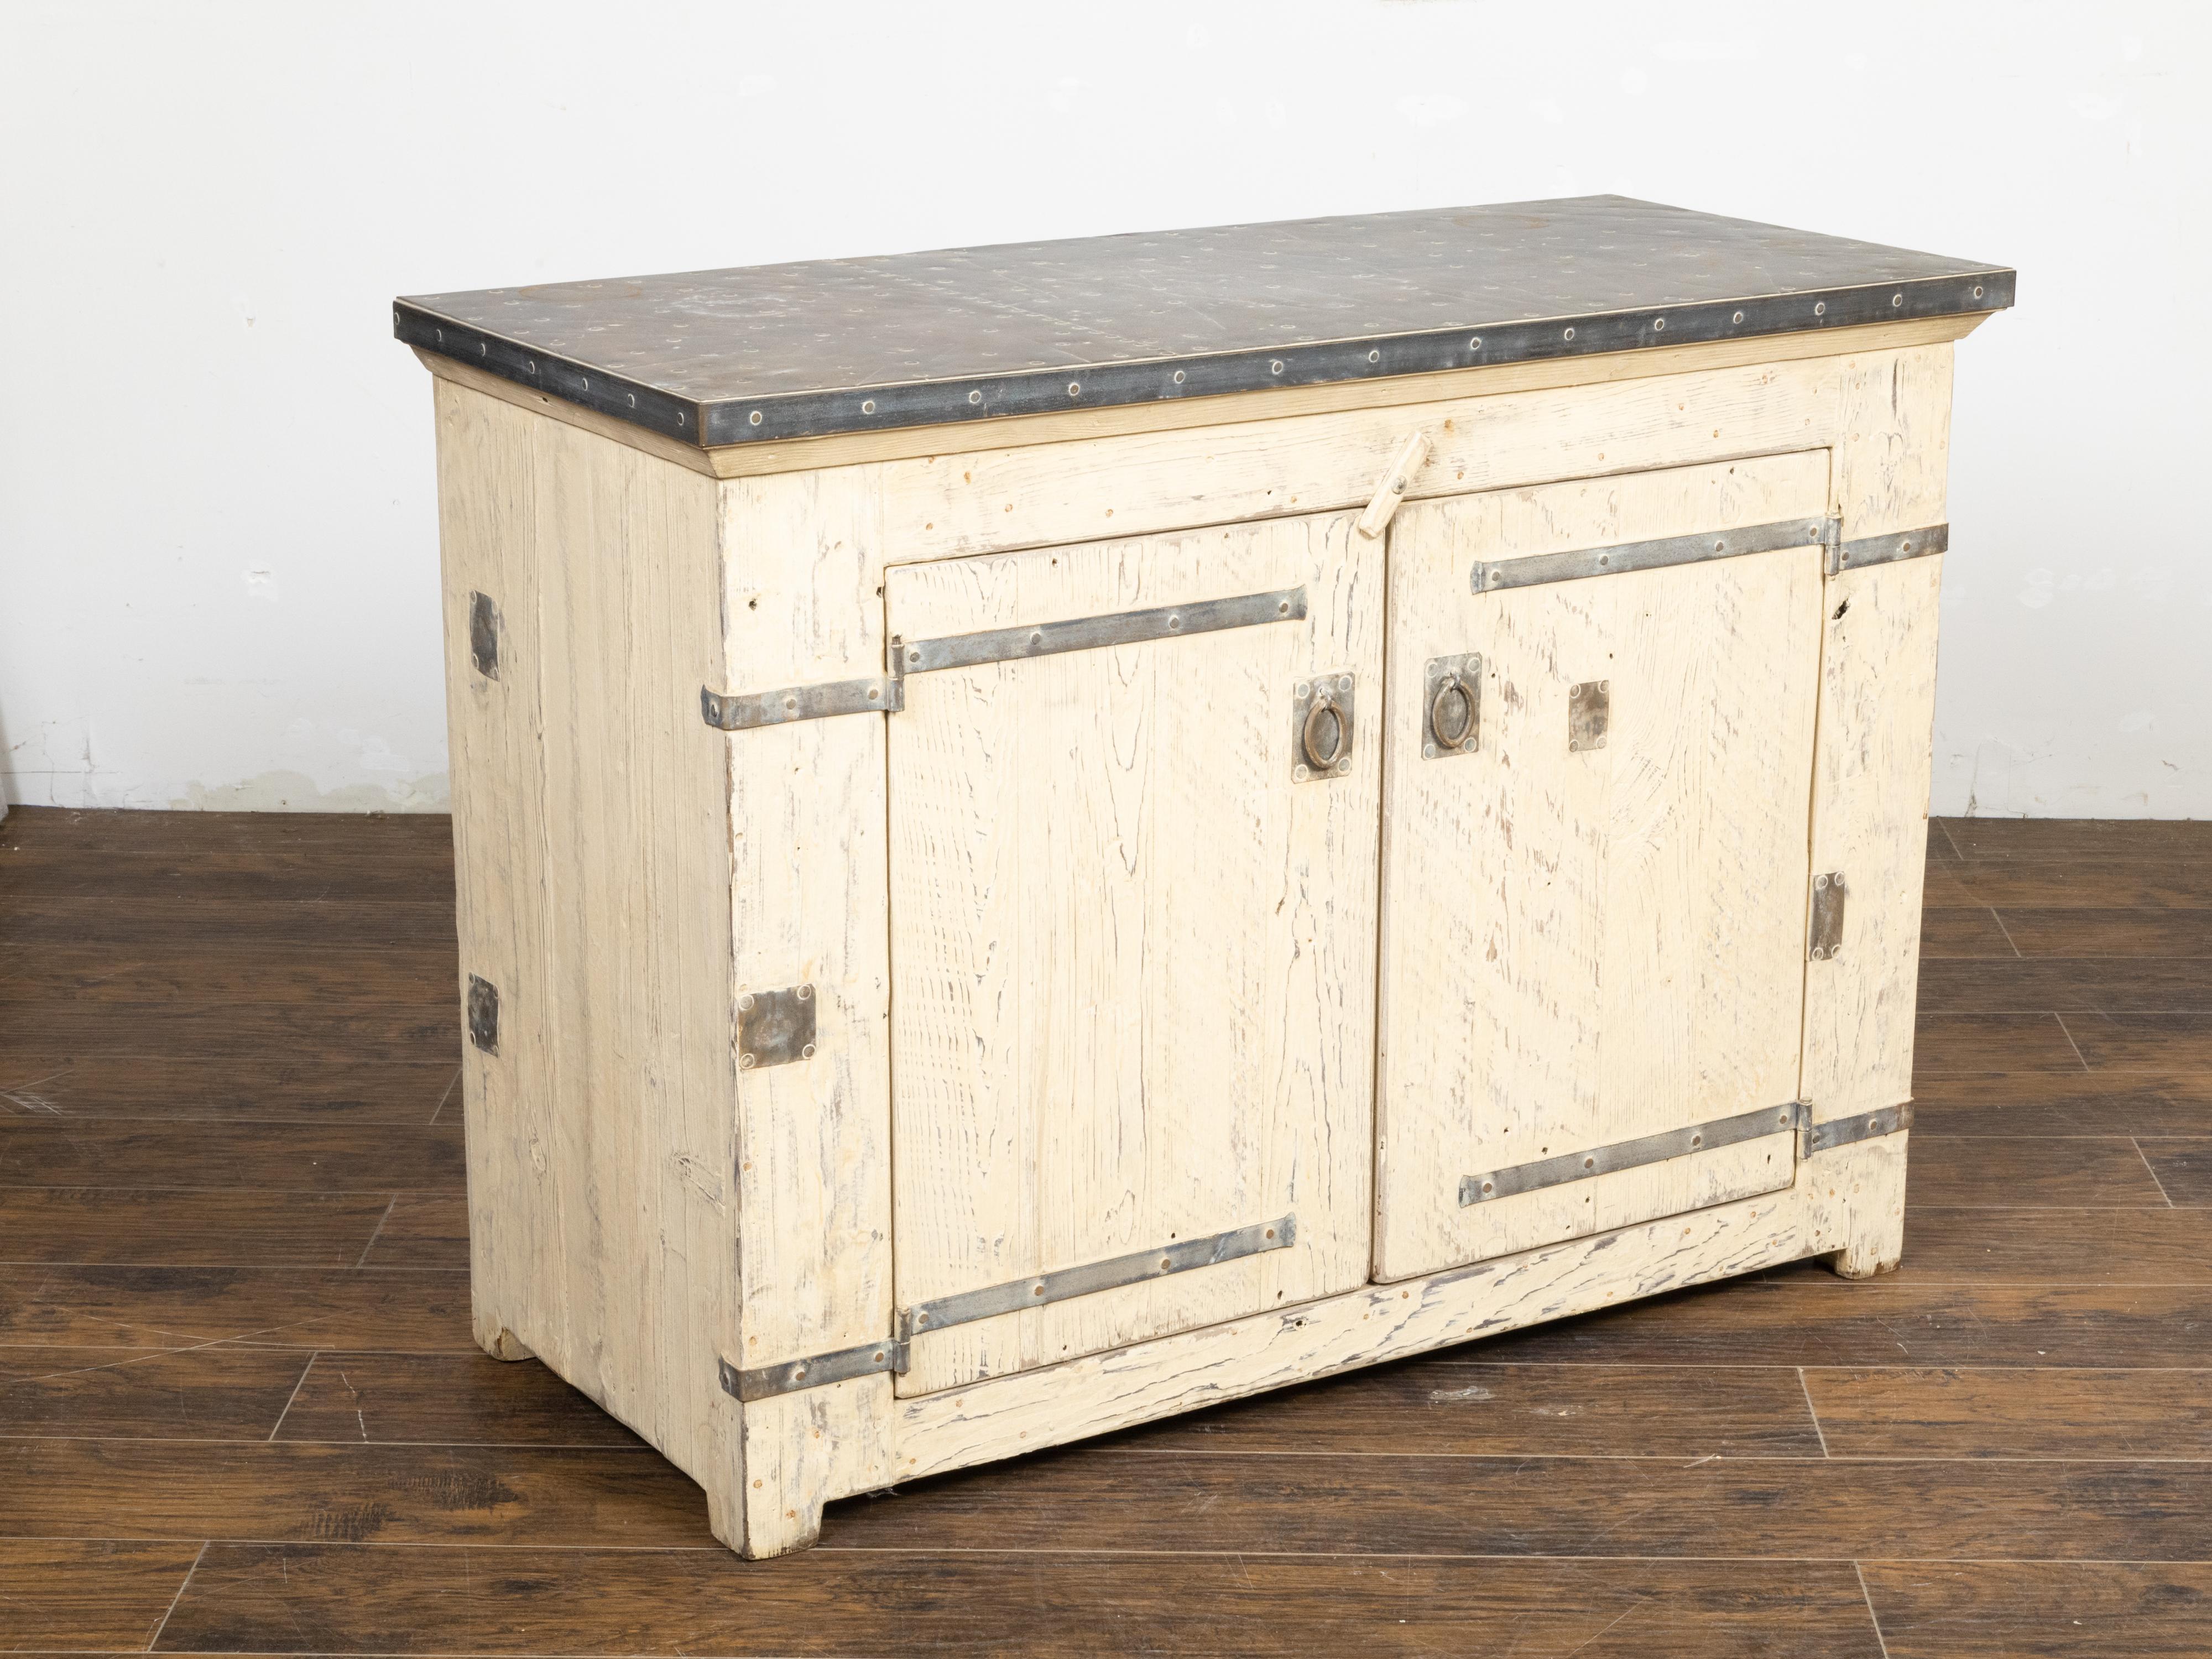 A painted pine buffet from 21 st c., with zinc top, two doors, light color, metal accents and rustic character. The painted pine buffet charms us with its simple lines as well as its rustic and industrial look. The piece features a rectangular zinc